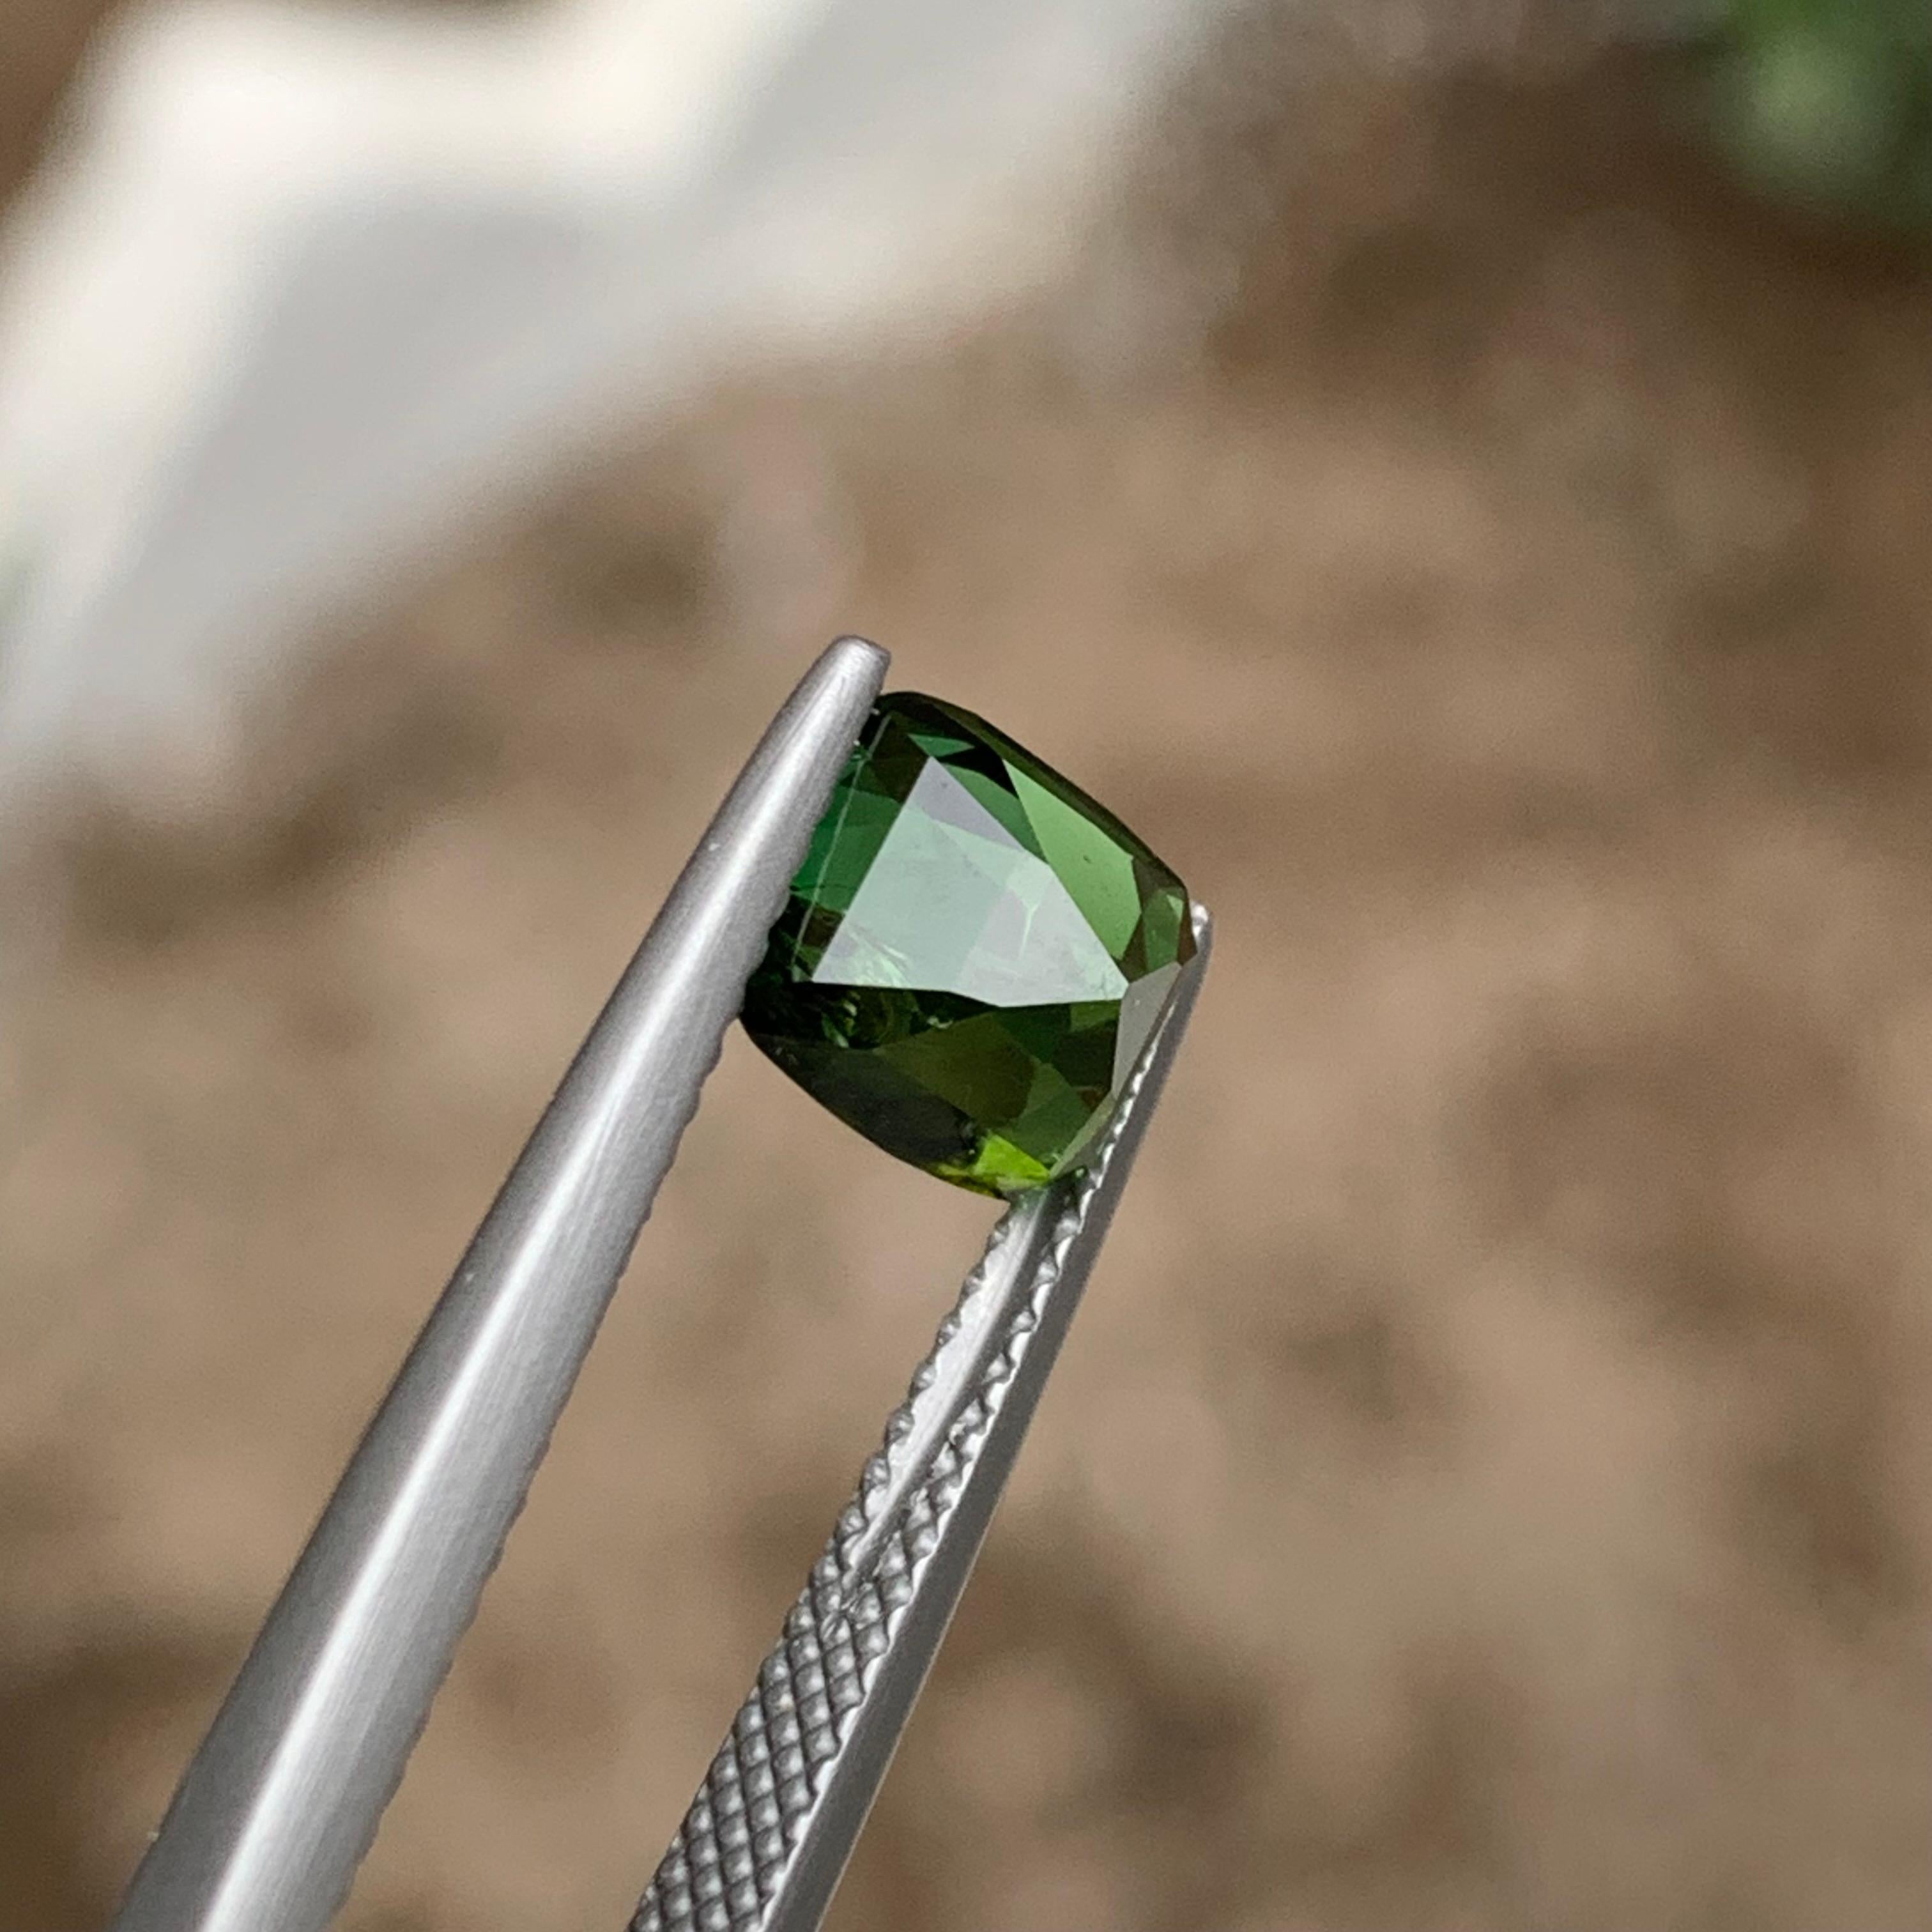 Rare Green Natural Tourmaline Loose Gemstone 2.10Ct Cushion Cut for Ring/Jewelry For Sale 6